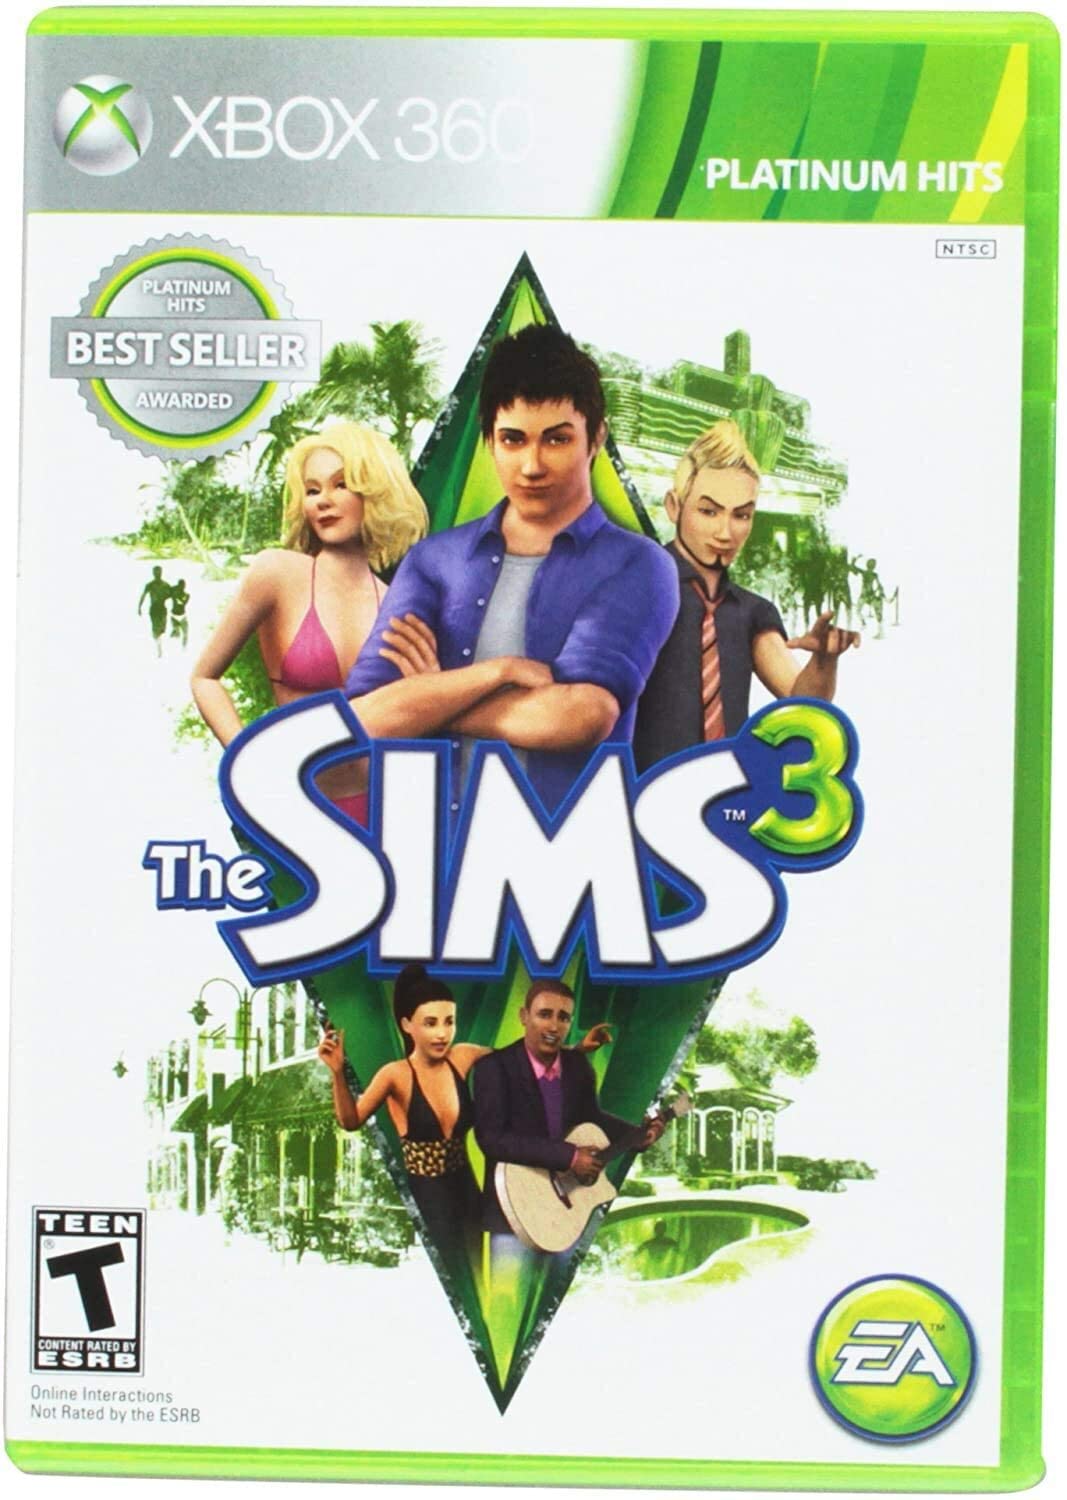 The Sims 3 - Platinum Hits Edition